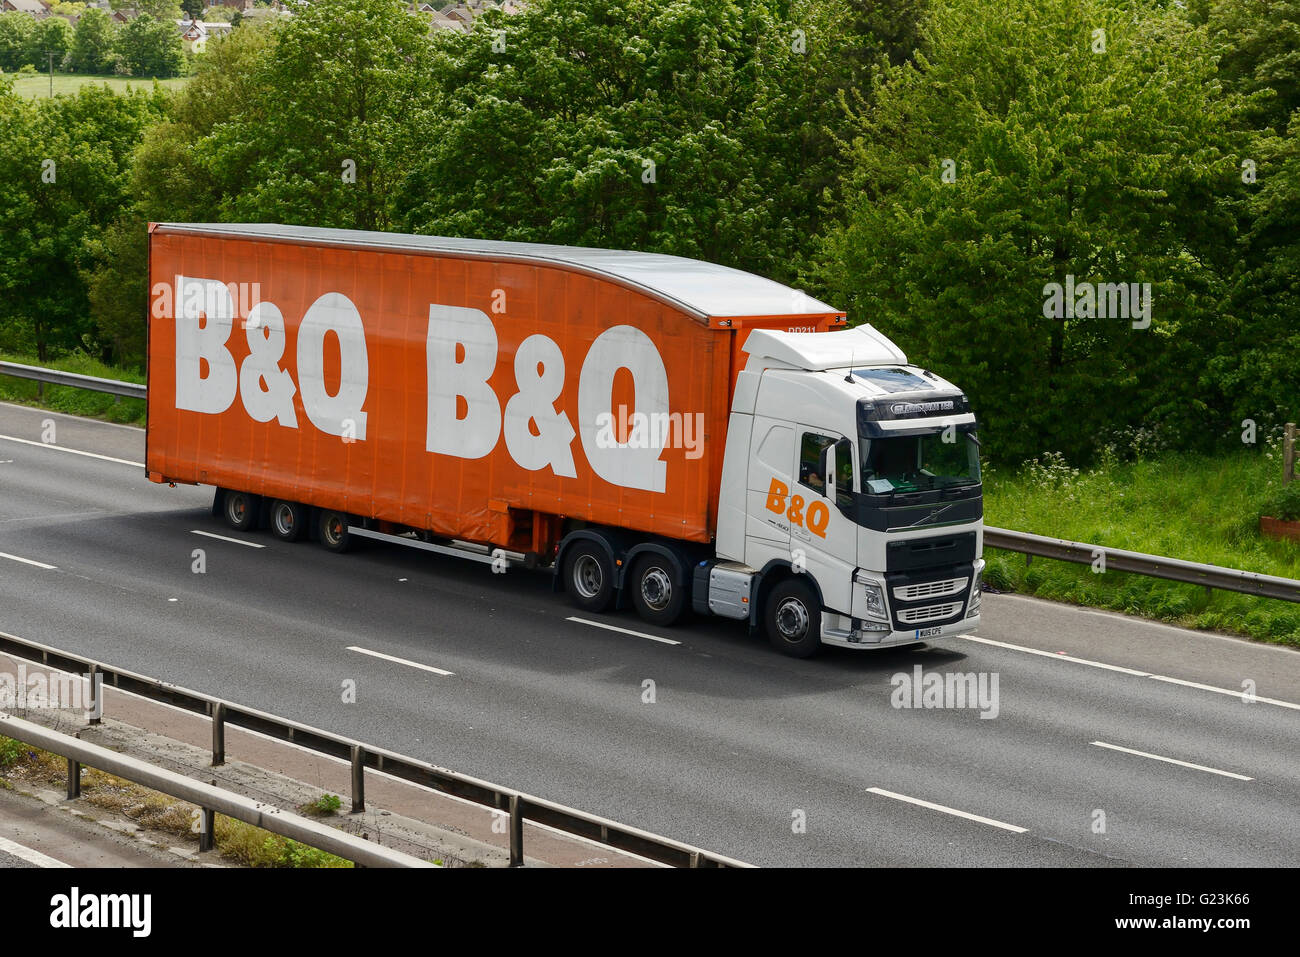 B&Q HGV travelling on the M56 motorway in Cheshire UK Stock Photo